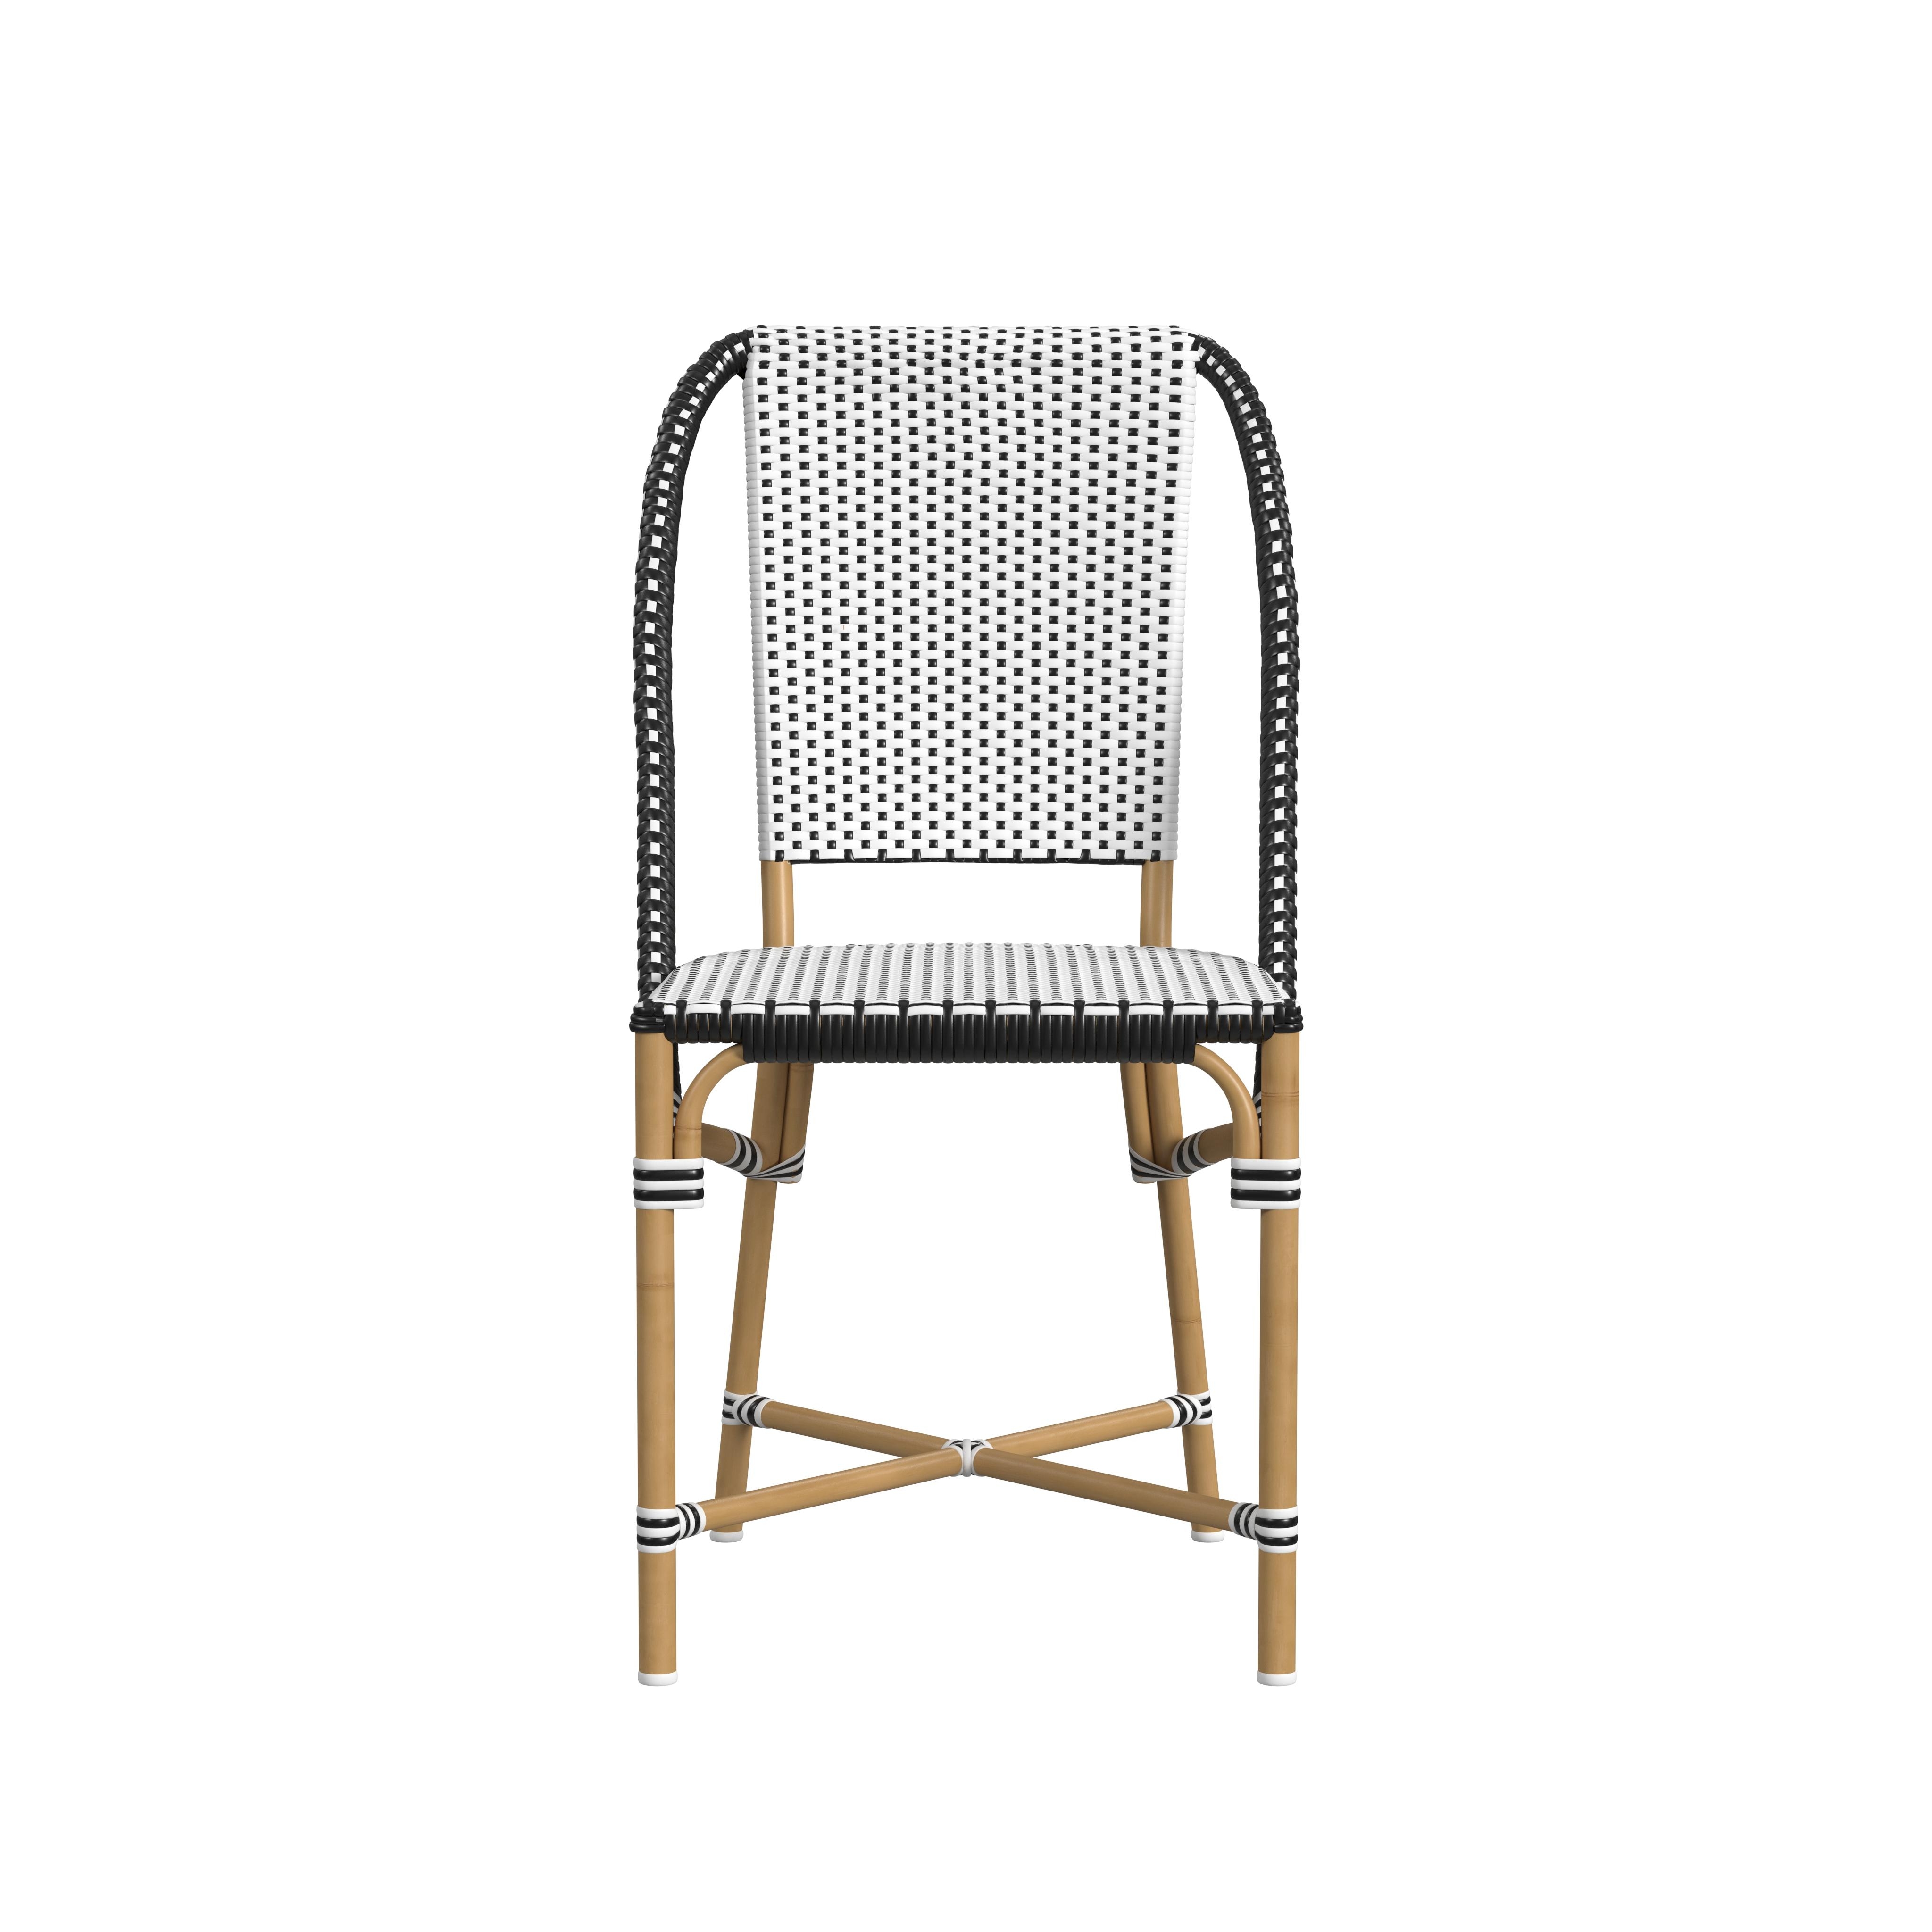 Tobias Black and White Outdoor Chair - Image 1